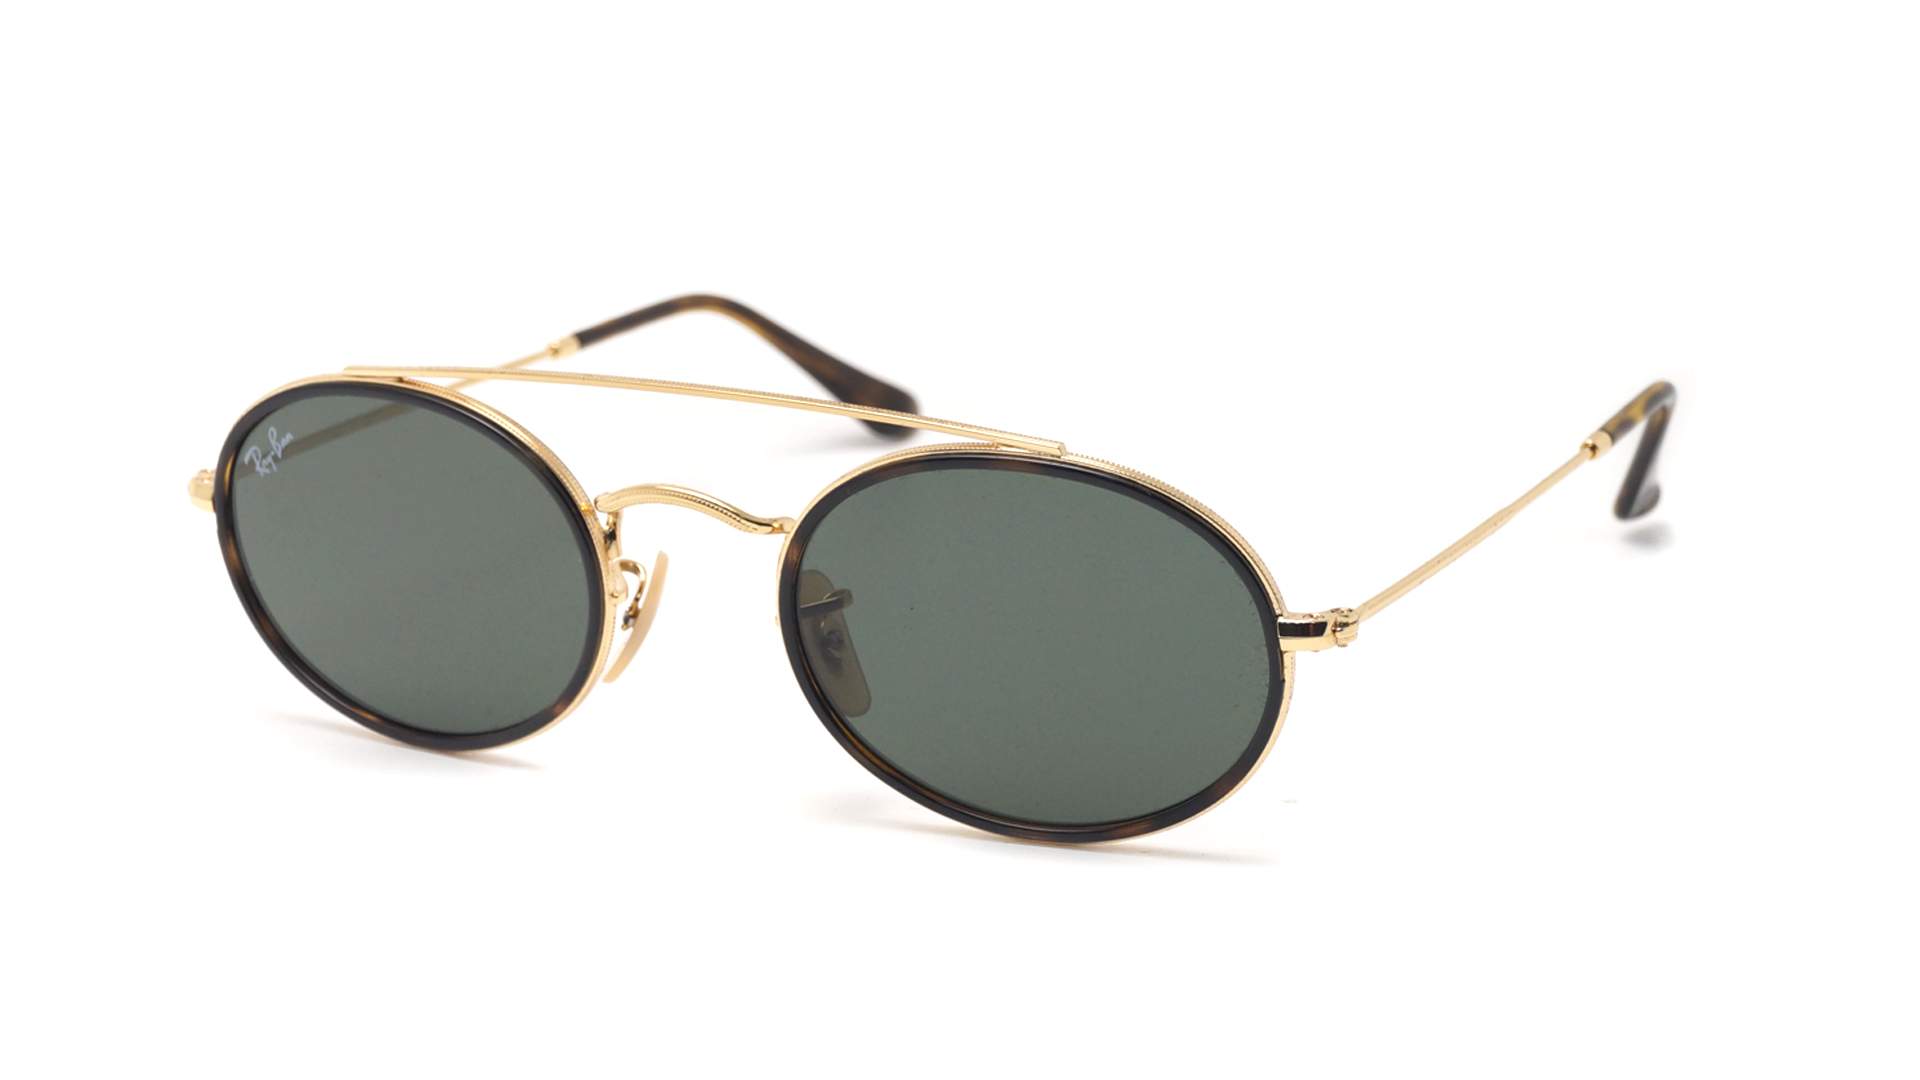 ray ban oval glasses